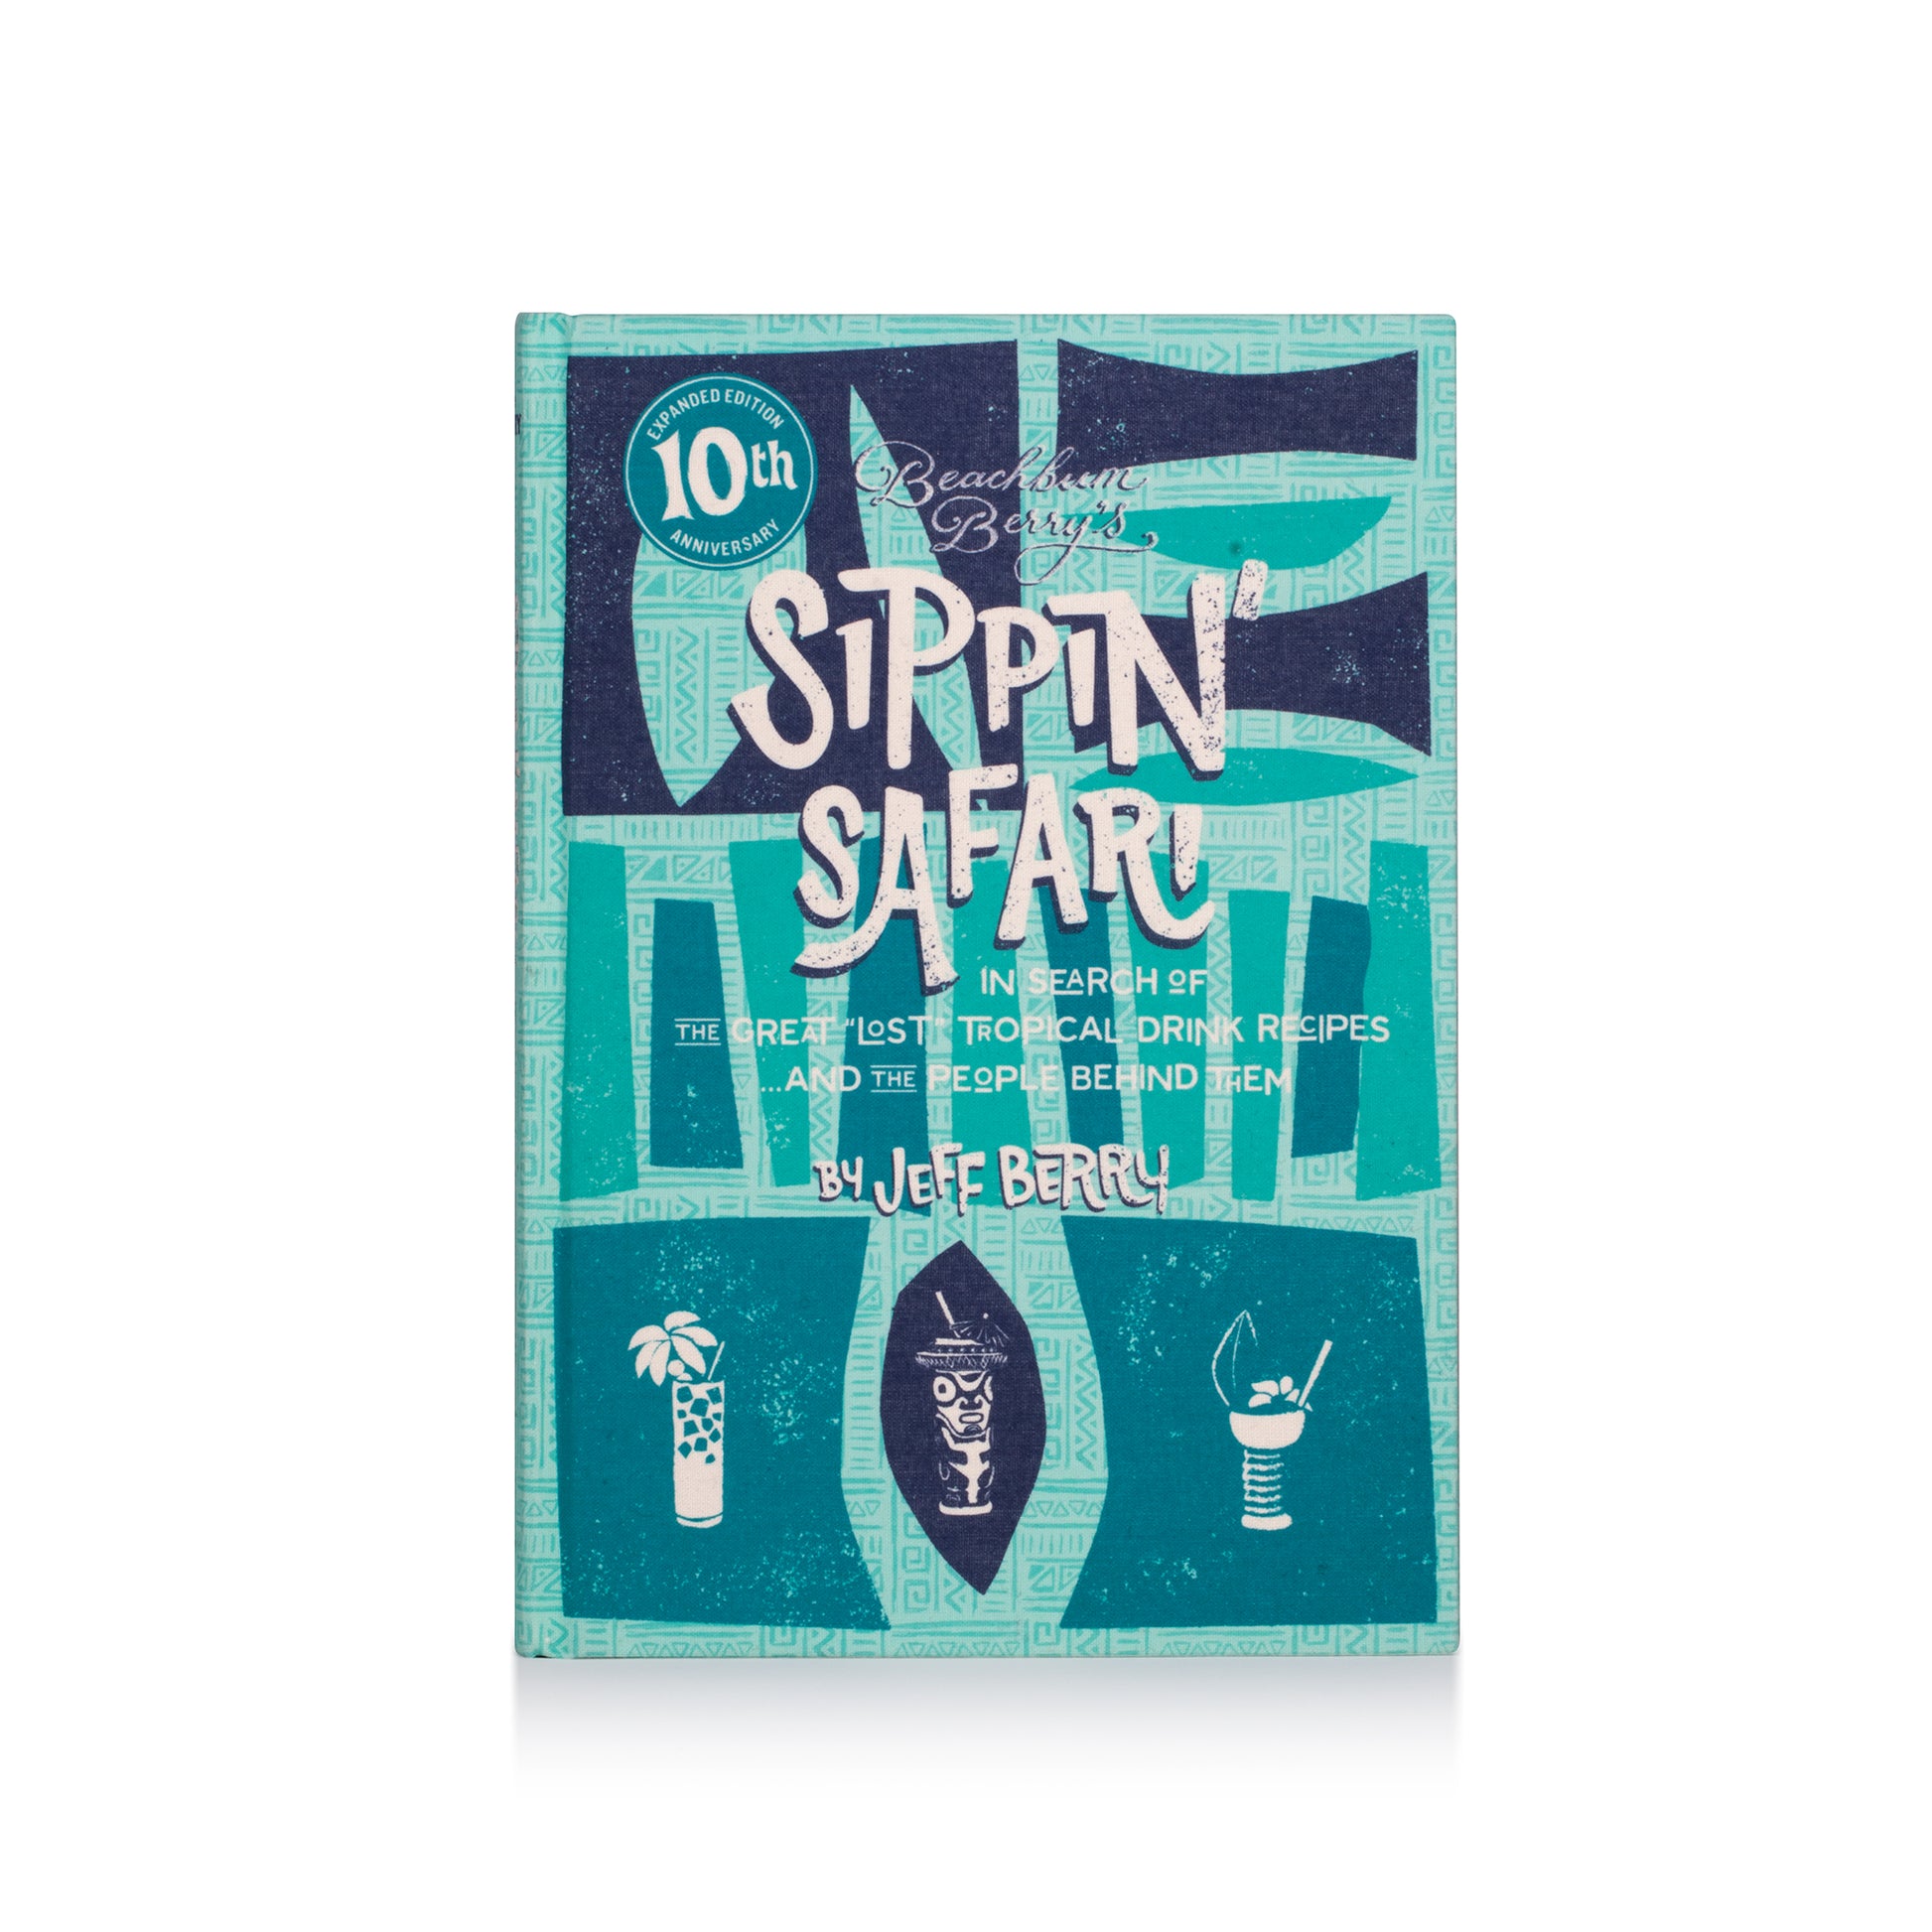 BEACHBUM BERRY'S SIPPIN' SAFARI: 10TH ANNIVERSARY EXPANDED EDITION BY JEFF BERRY